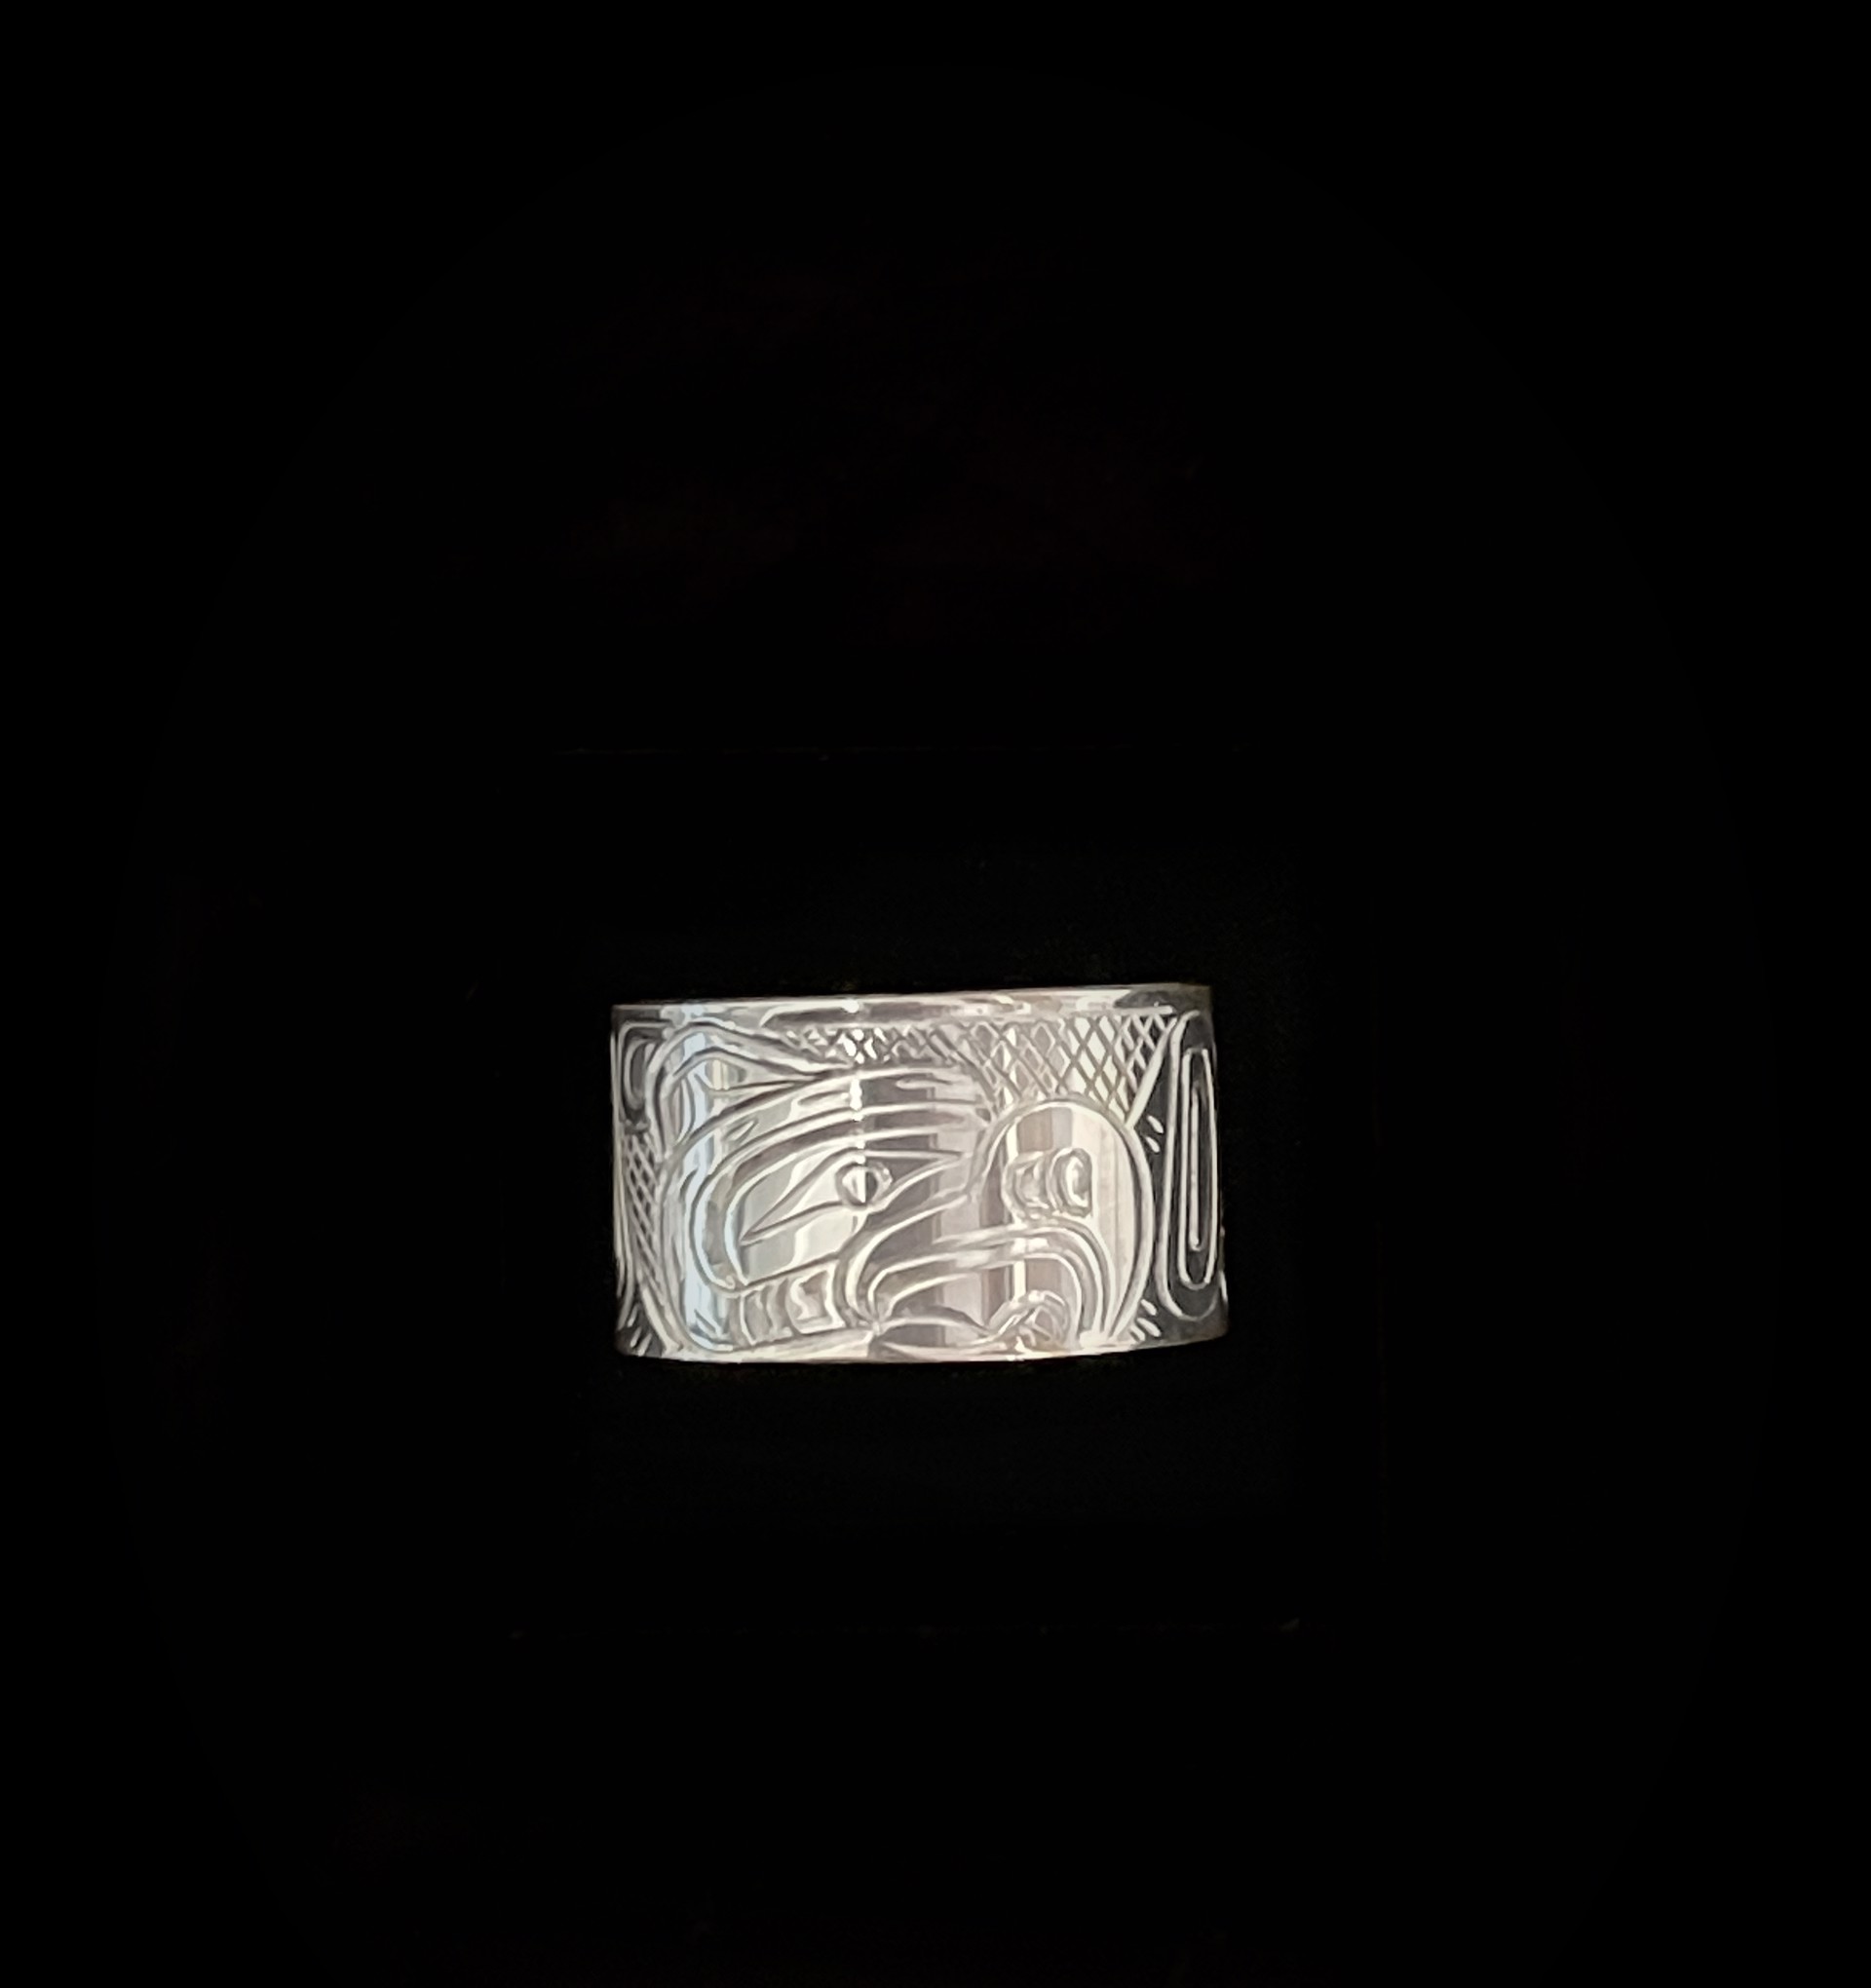 Thunderbird Ring by William Cook